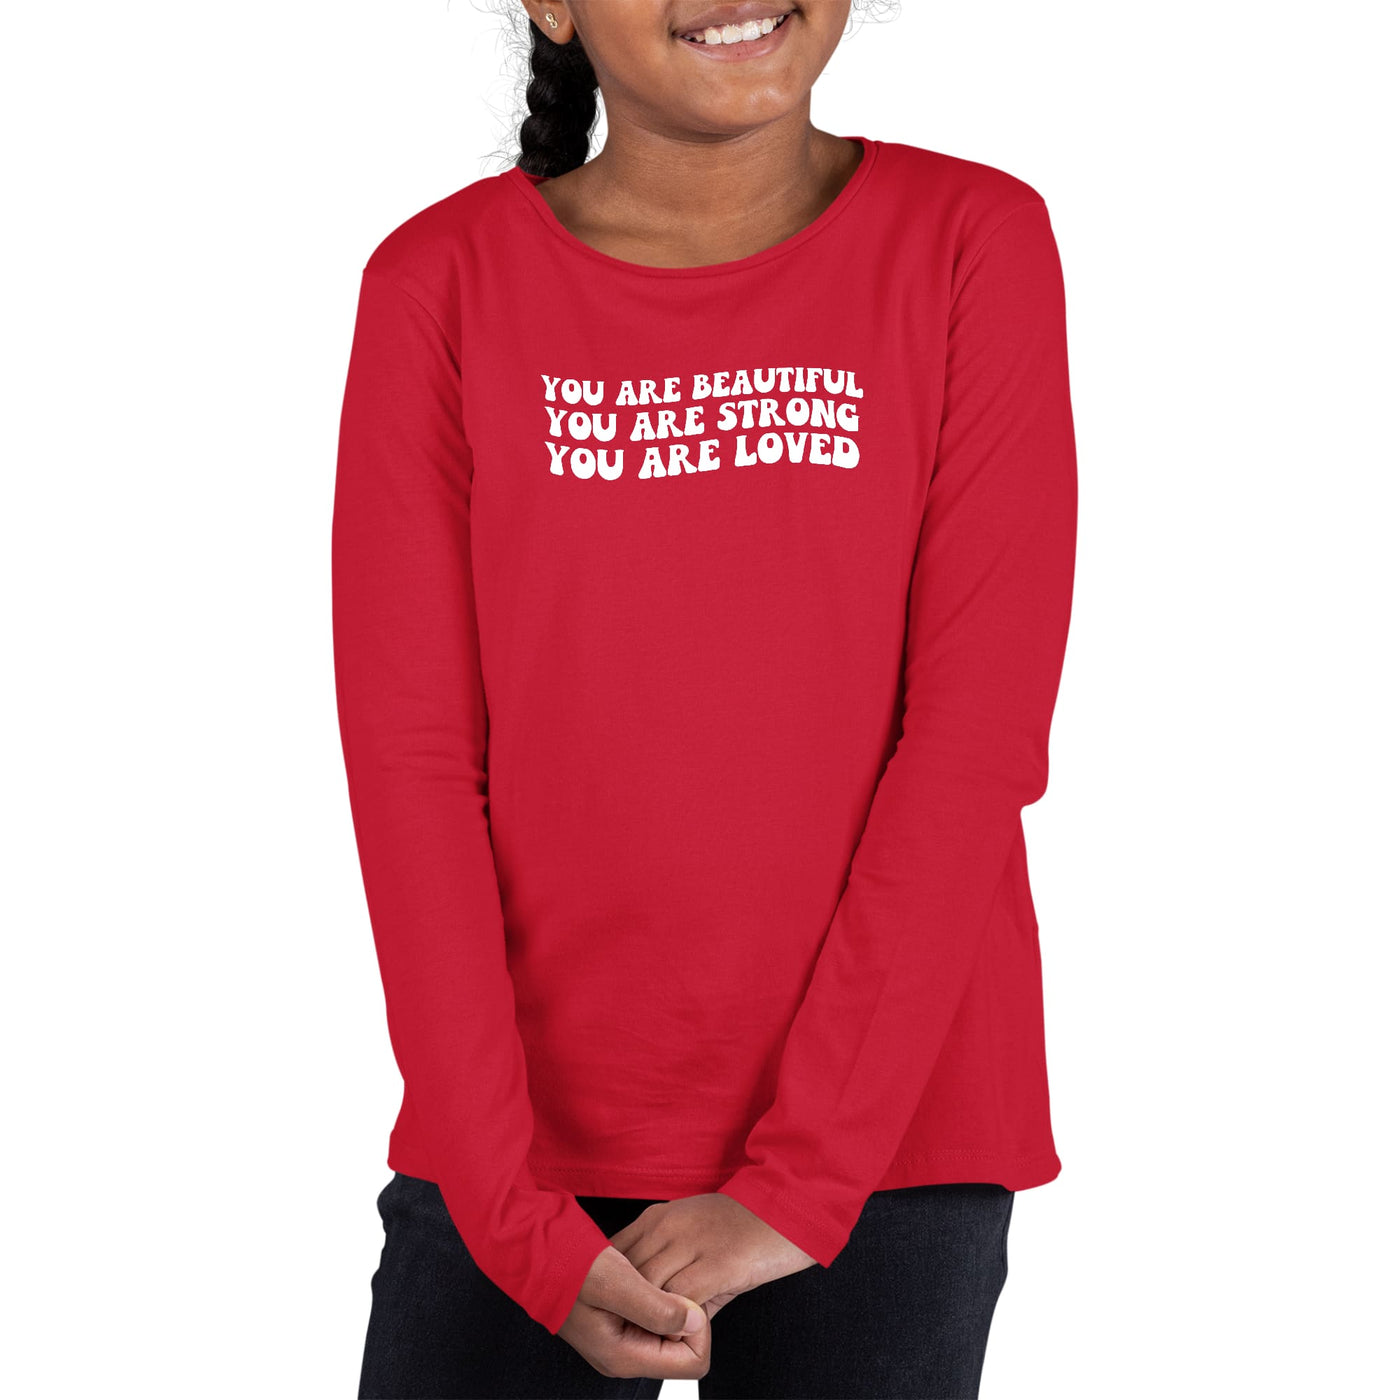 Youth Long Sleeve Graphic T-shirt You Are Beautiful Strong Loved - Girls